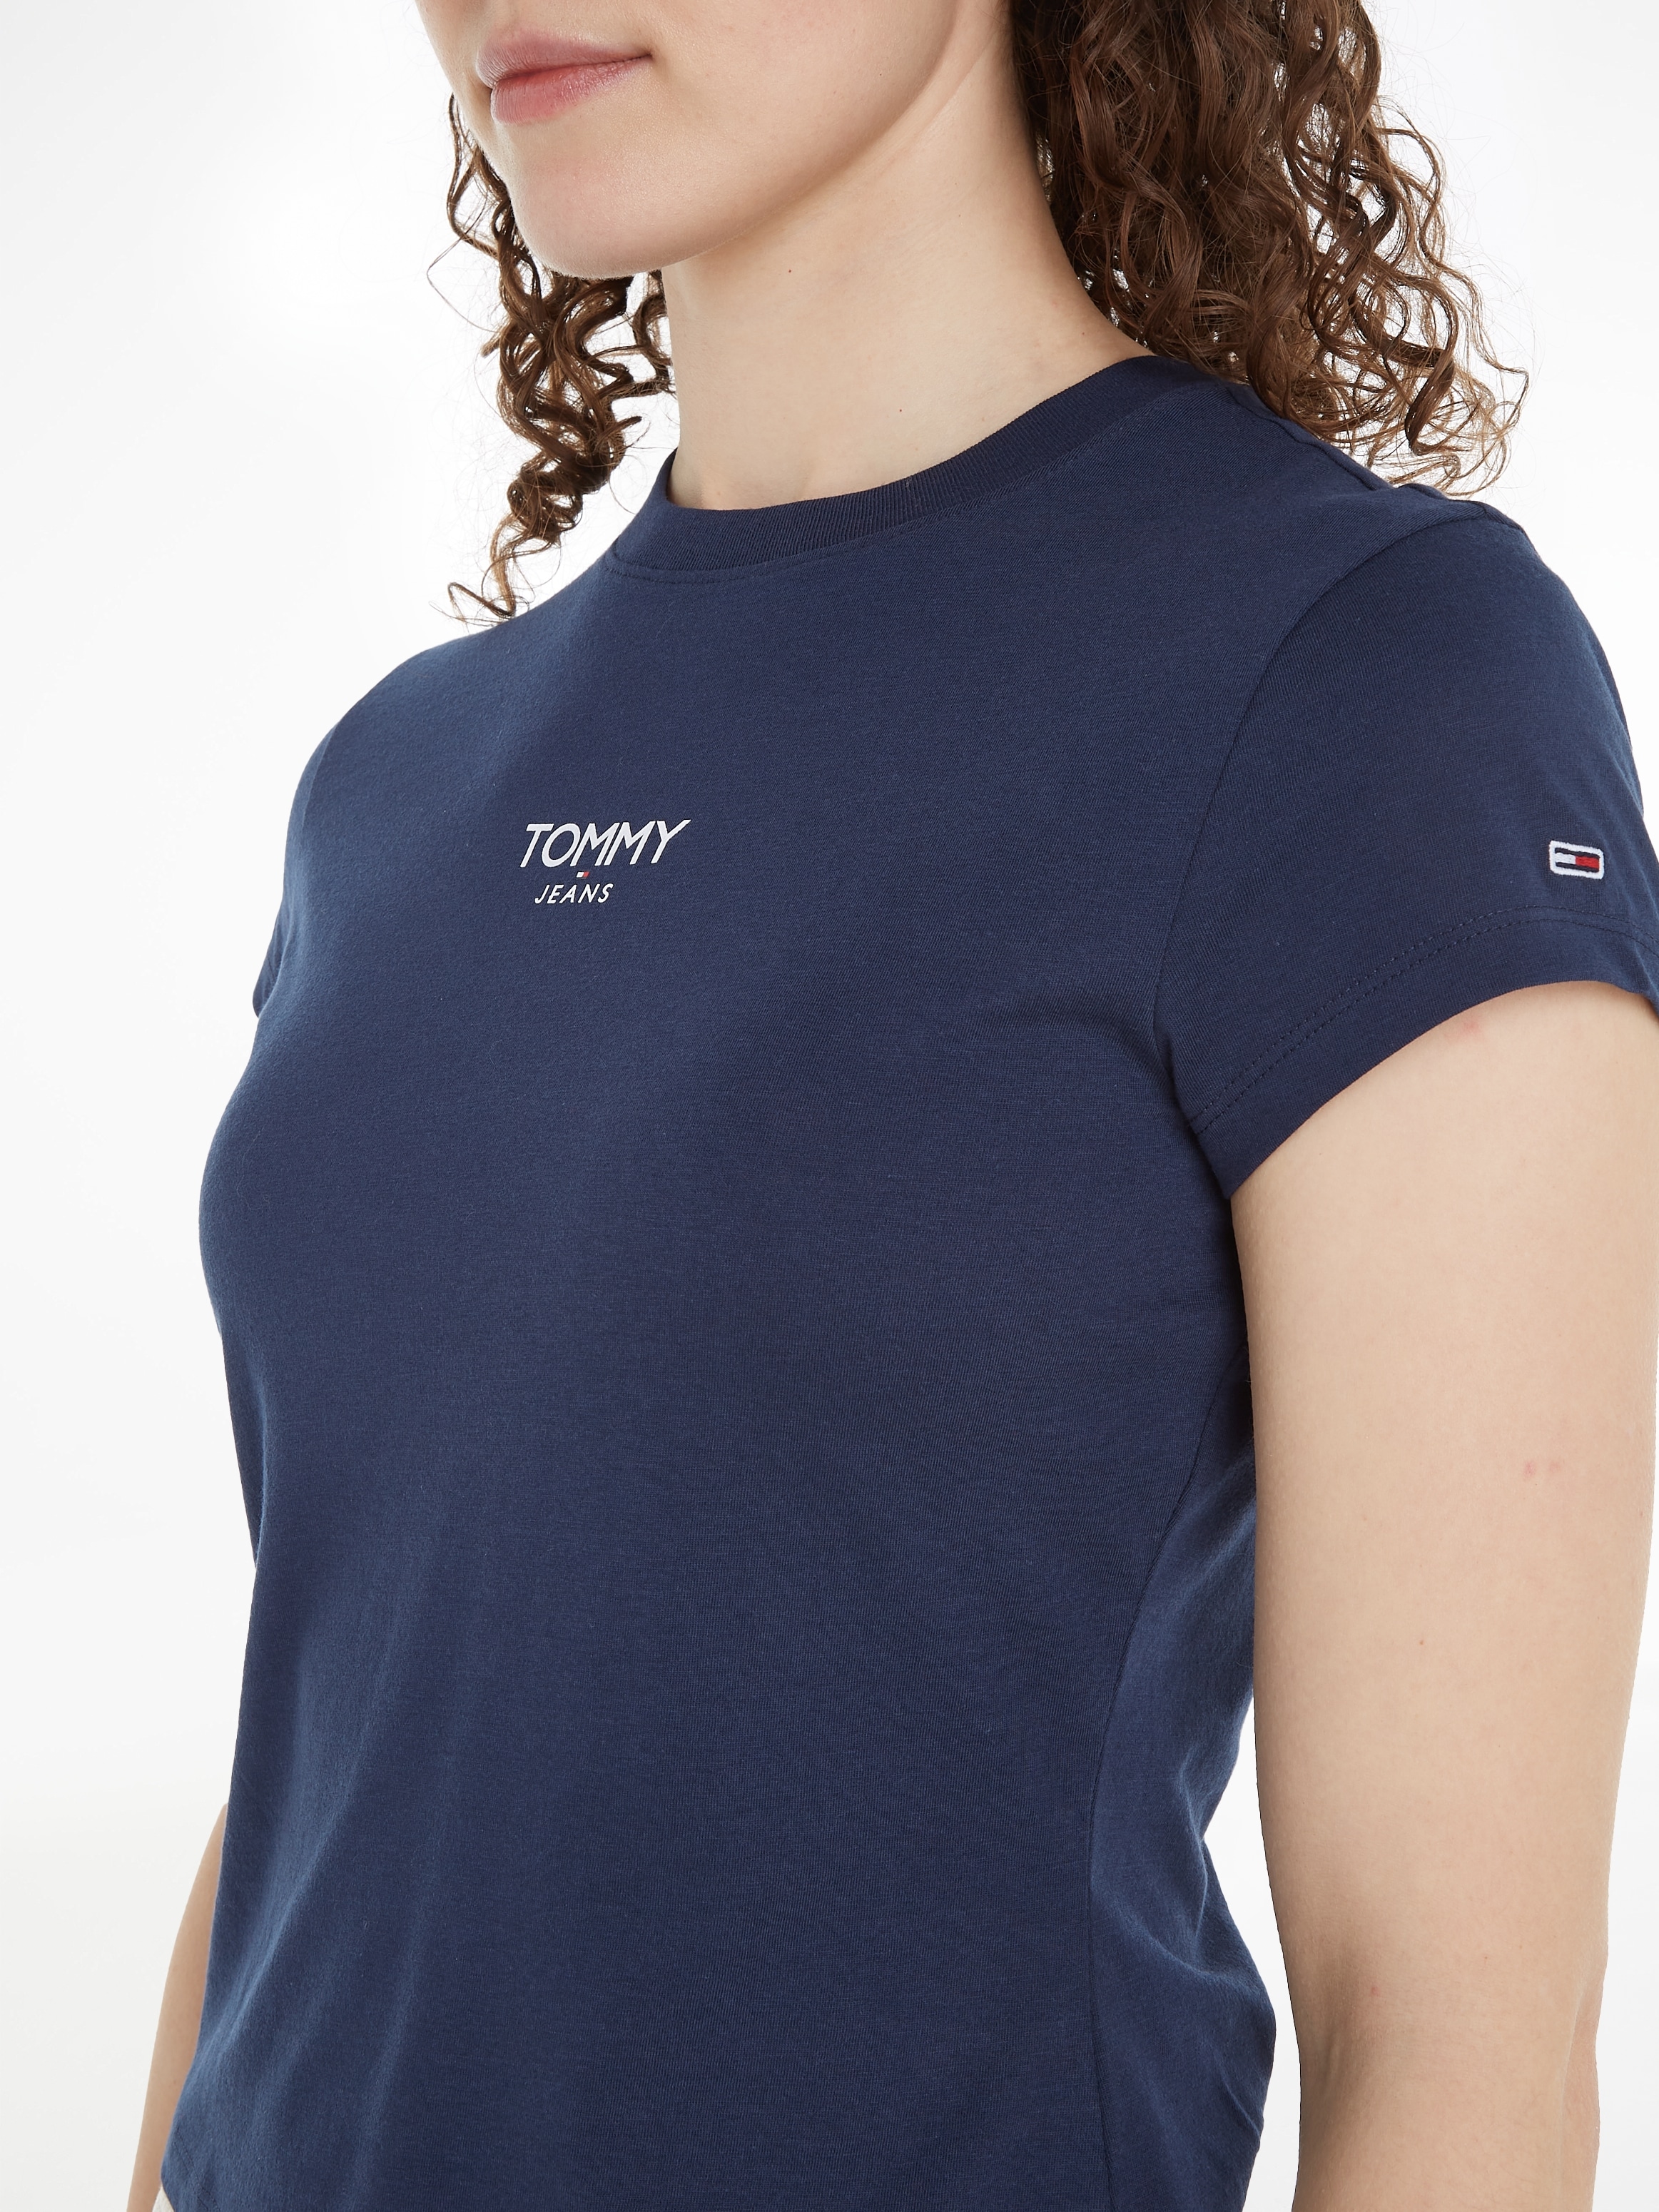 ESSENTIAL Tommy mit Jeans LOGO bei Jeans Tommy BBY Logo T-Shirt ♕ SS«, »TJW 1